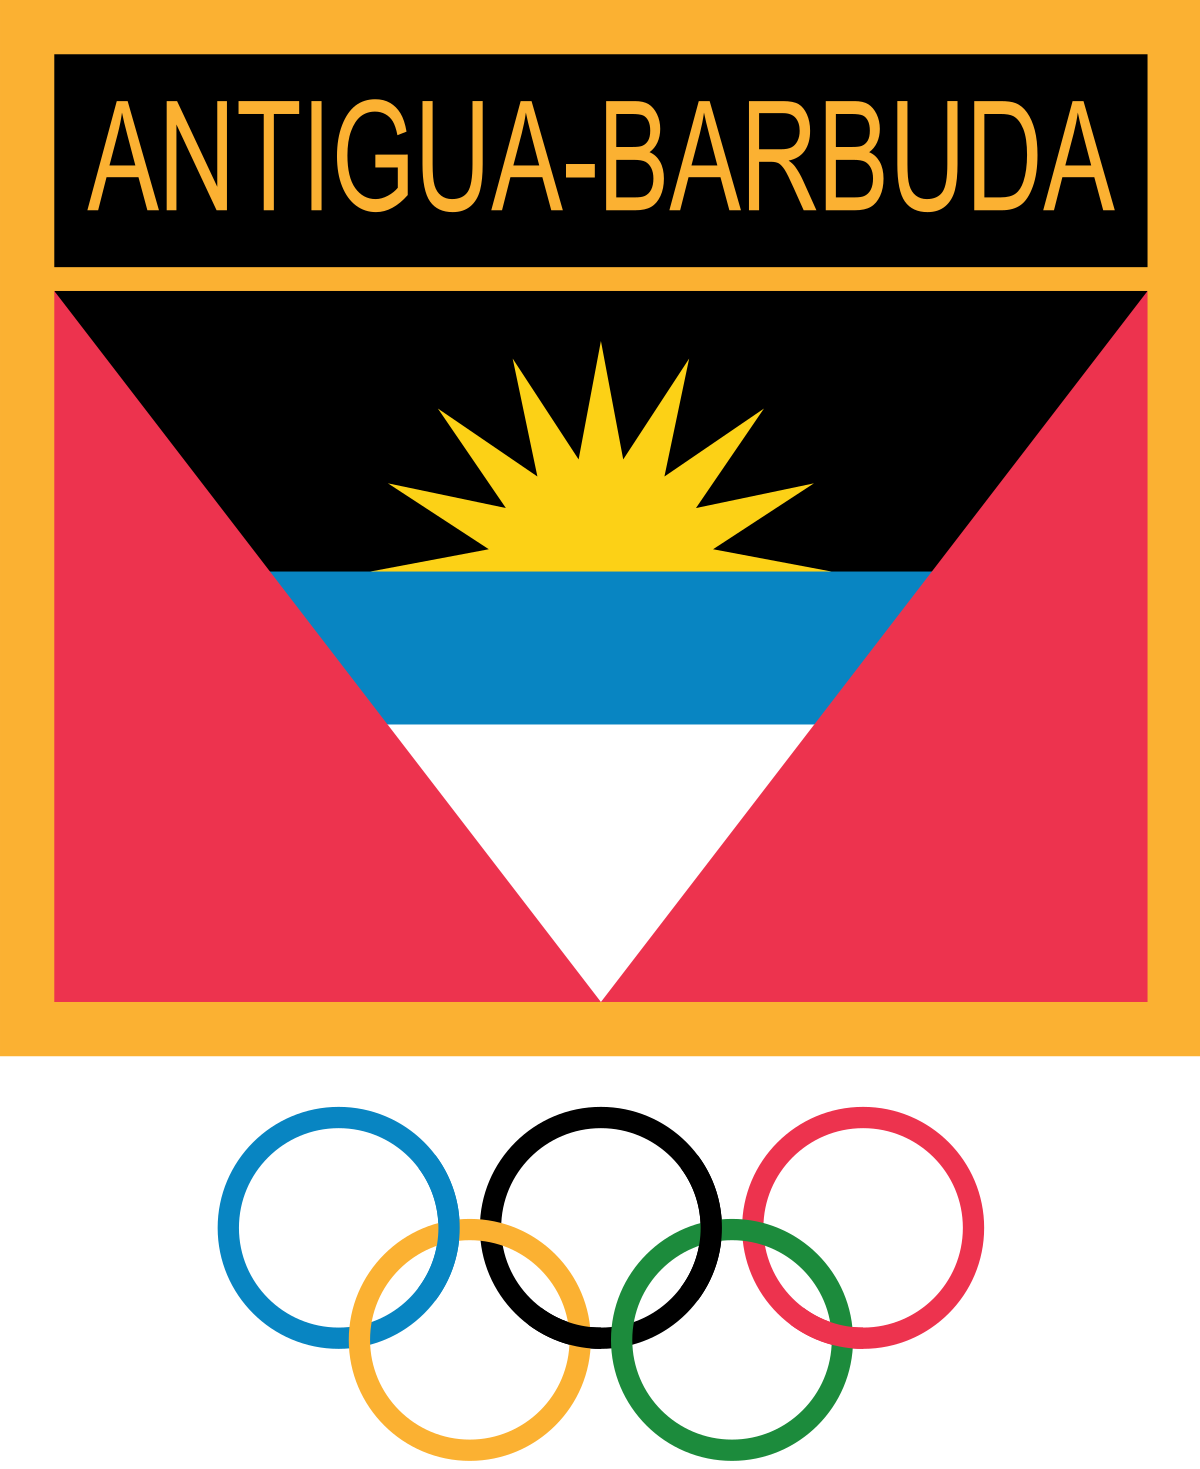 Front-line workers against COVID-19 will be honoured by Olympic Day celebrations put on virtually by Antigua and Barbuda's National Olympic Committee on June 26 ©Antigua and Barbuda NOC